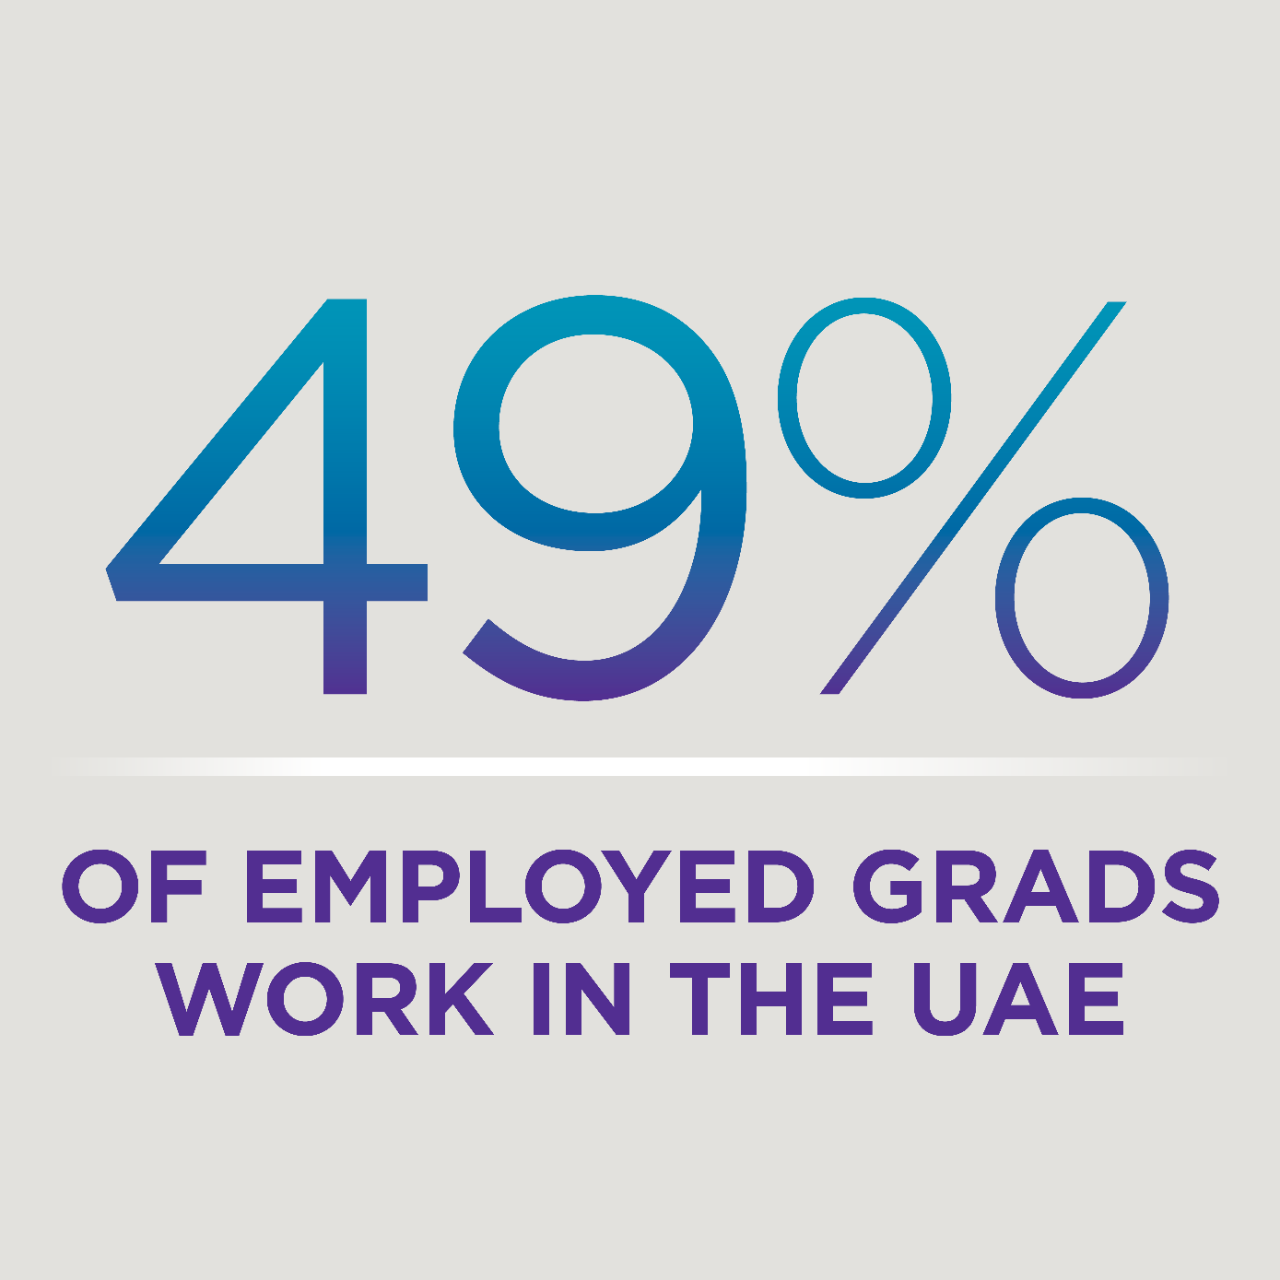 49% of employed grads work in the UAE.